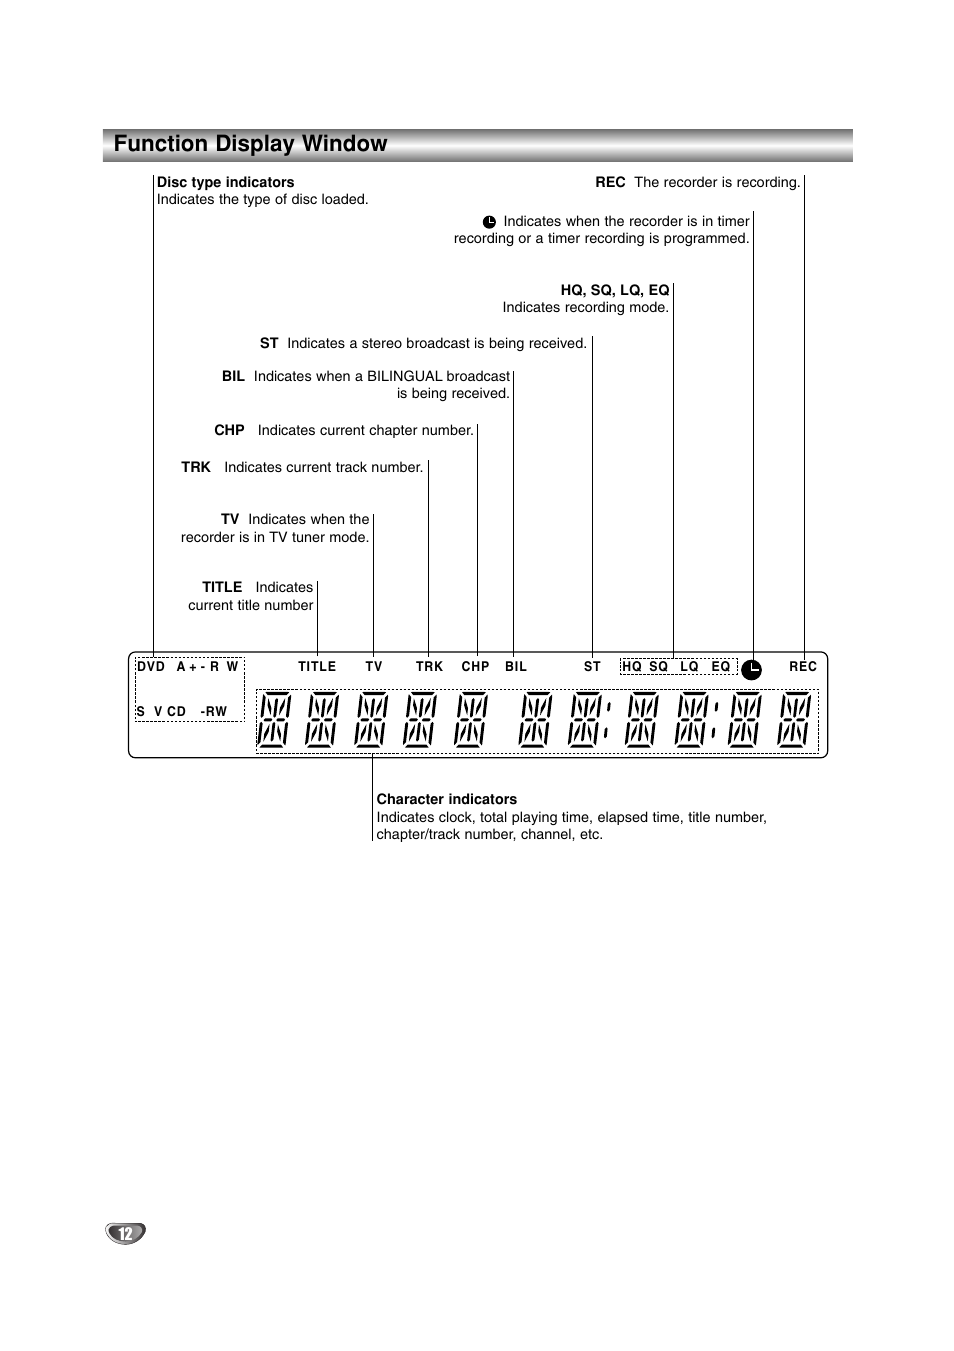 Function display window | LG DR4912 User Manual | Page 12 / 64